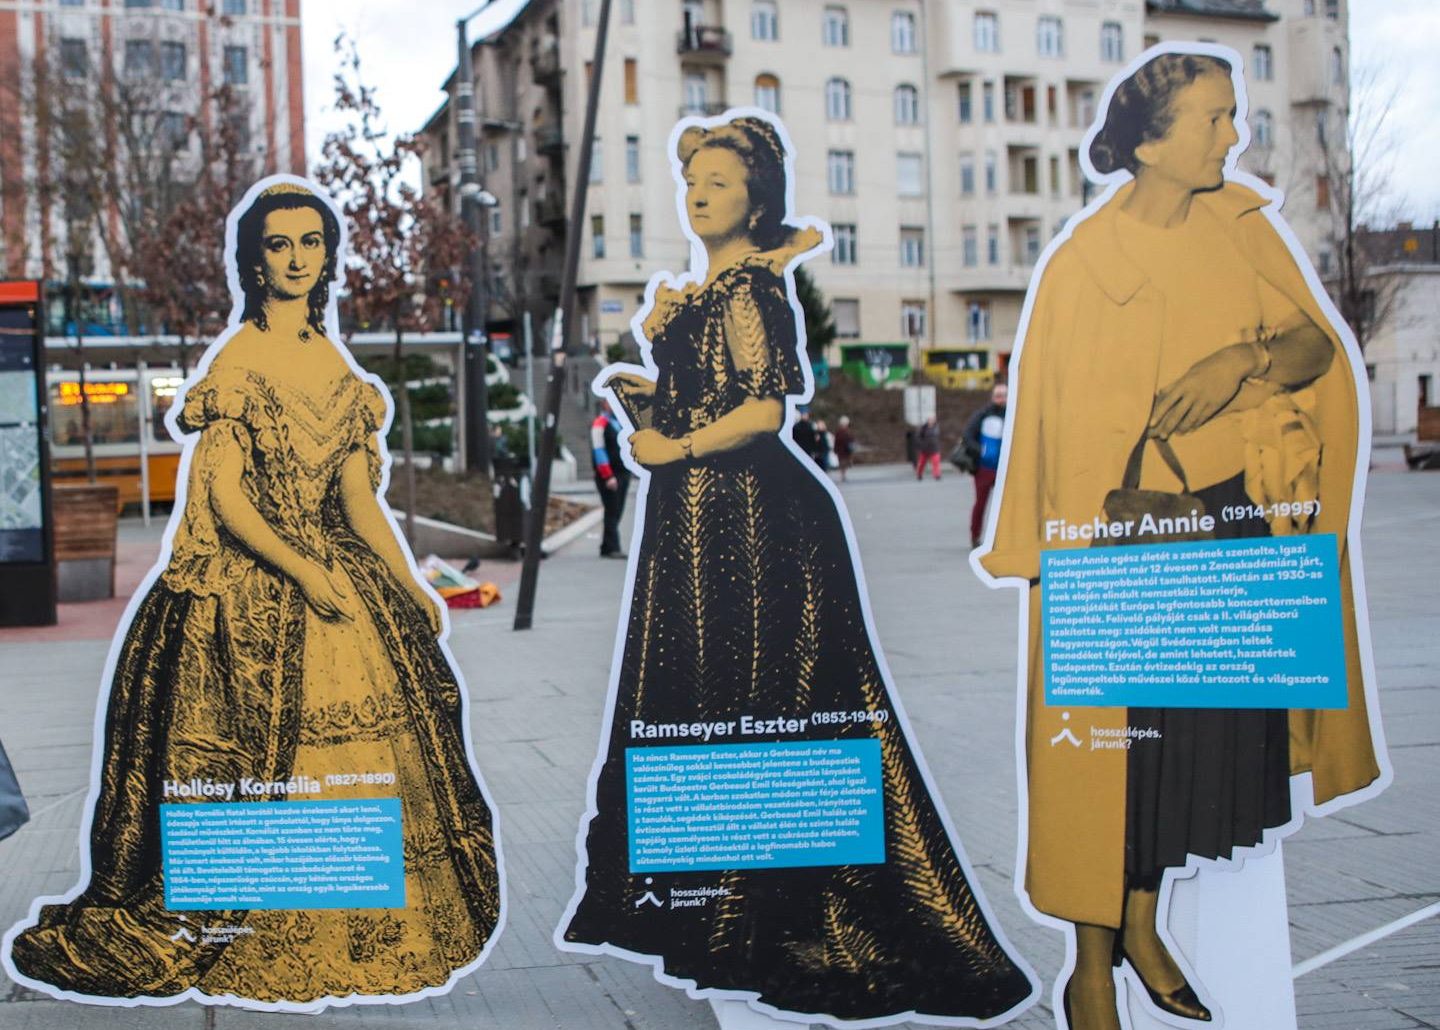 Movement for More Women Statues in Budapest Starts with Poll